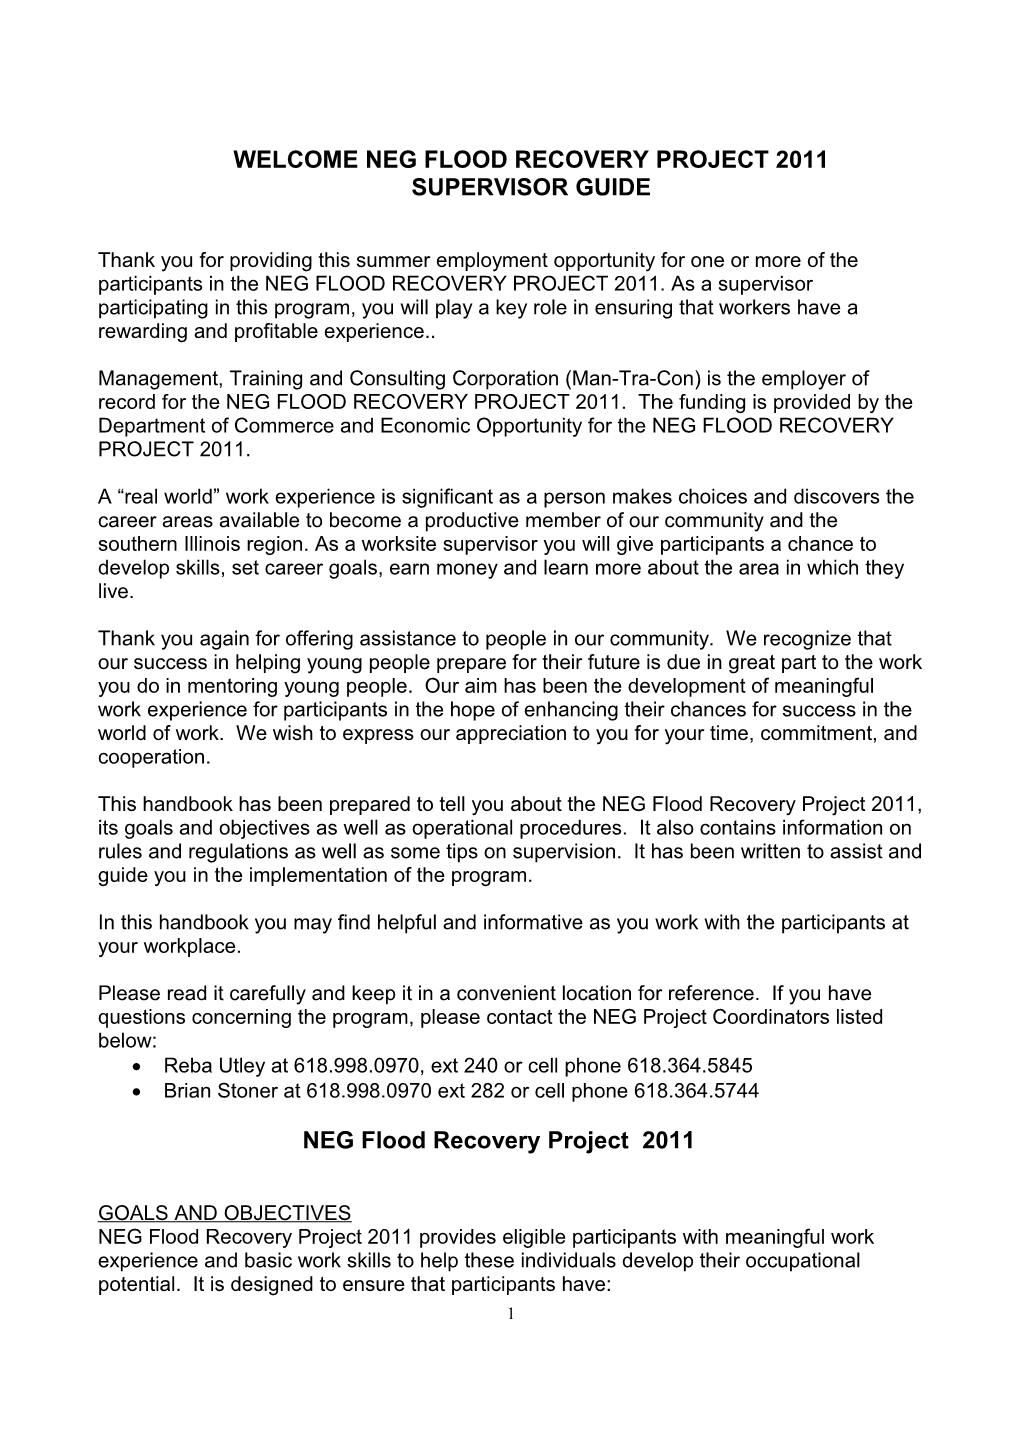 NEG Flood Recovery Project Supervisor Guide